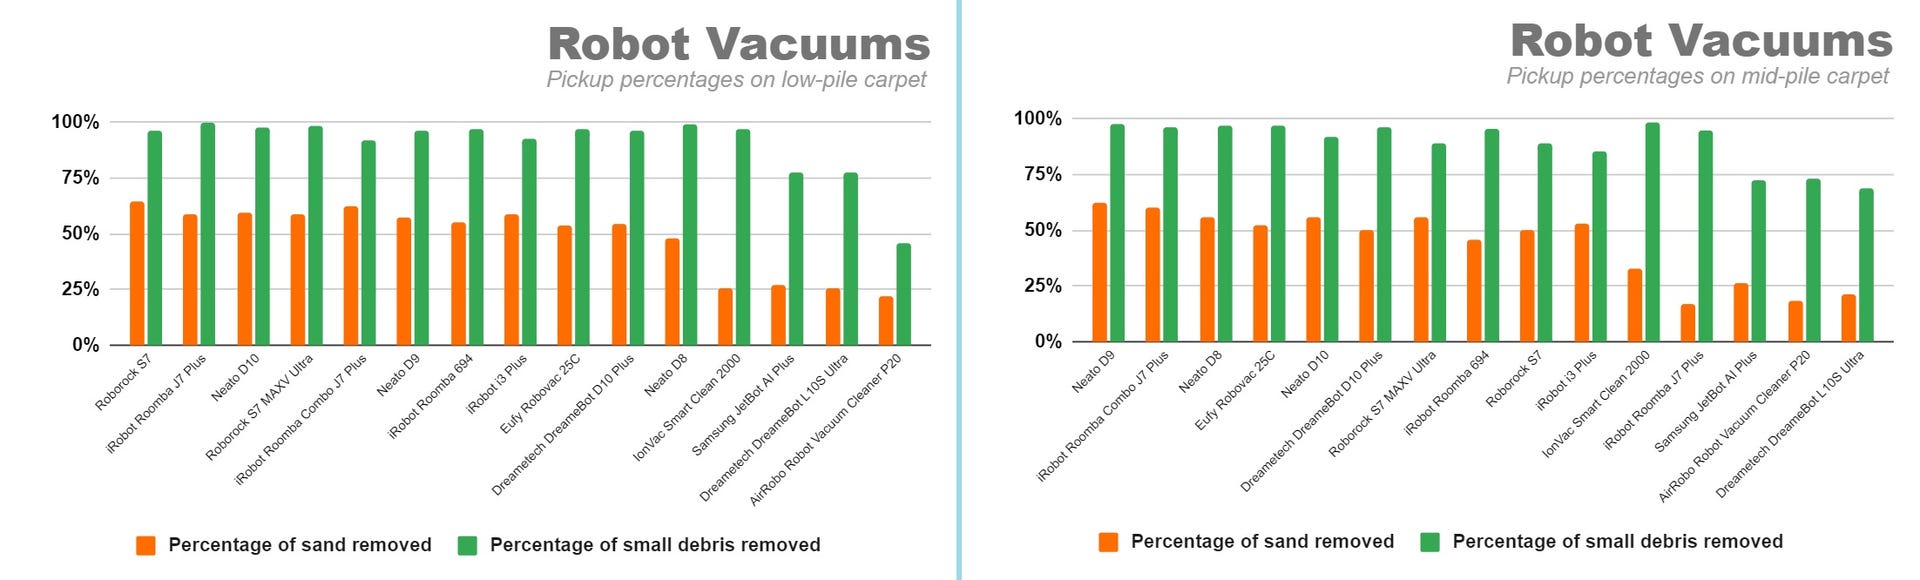 A set of two bar graphs show the pickup percentages for fifteen robot vacuums on low-pile and mid-pile carpets. The Roomba Combo J7 Plus finished in fifth place on low-pile carpets and second place on mid-pile carpets. Meanwhile, the Roborock S7 MaxV Ultra finished fourth and seventh, respectively.